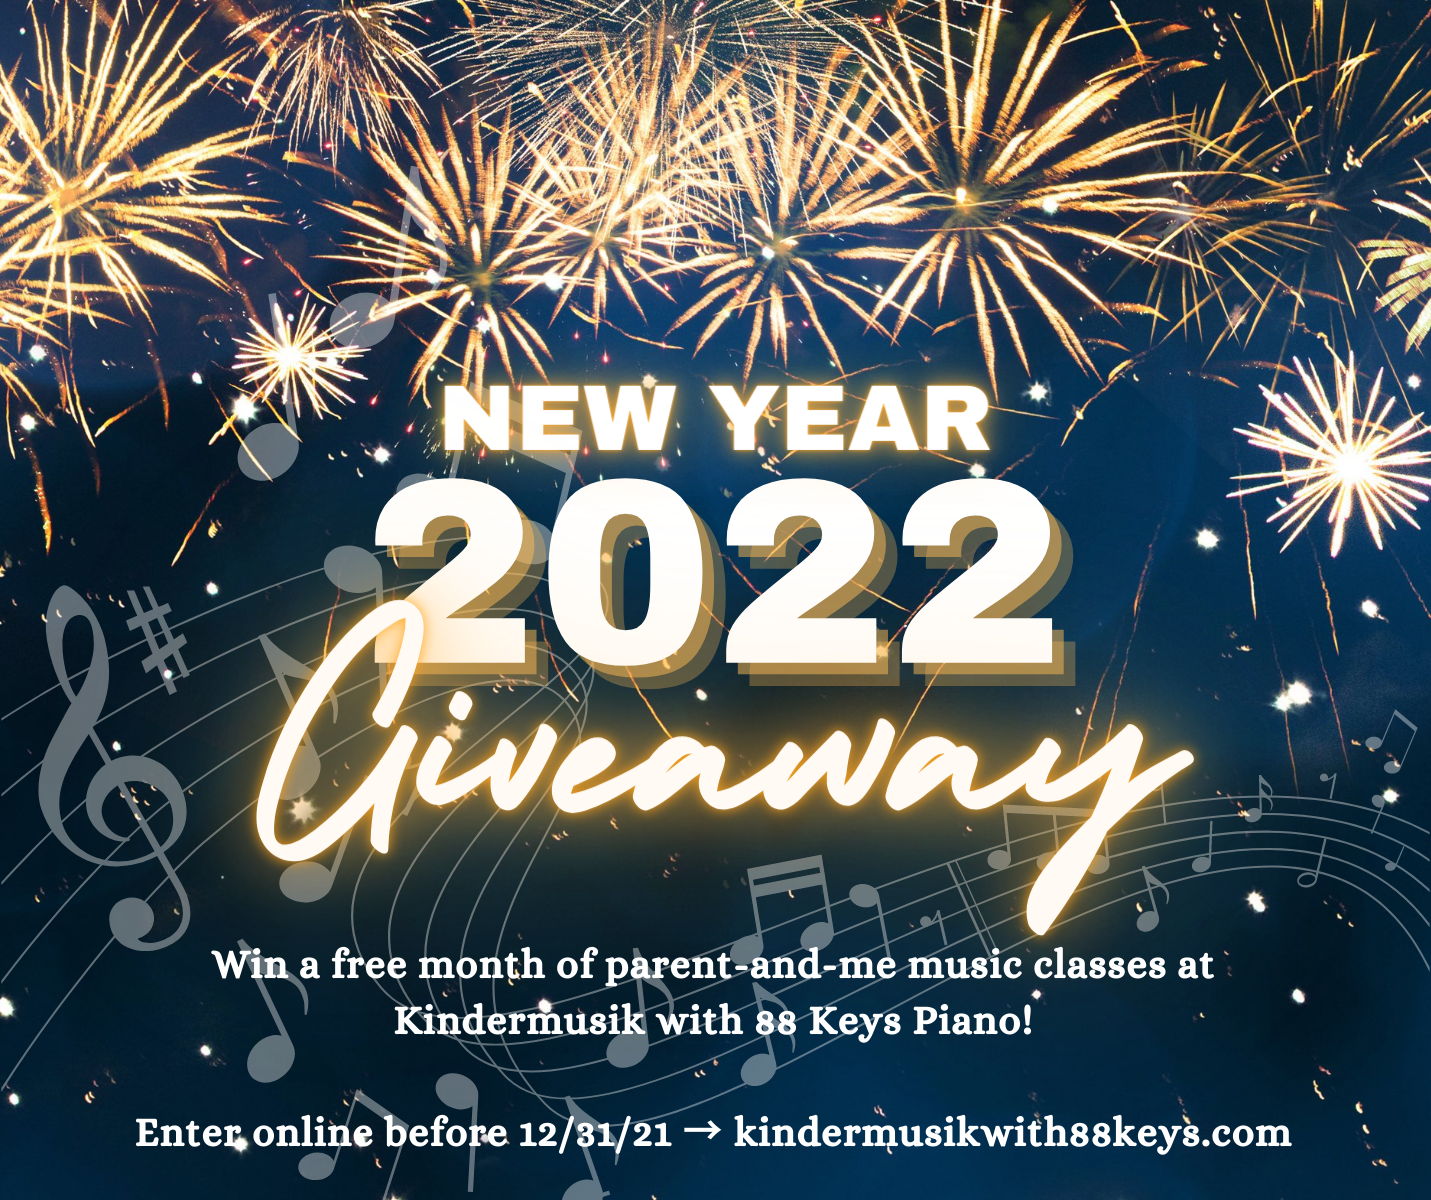 Win FREE January Kindermusik in our New Year 2022 Giveaway!